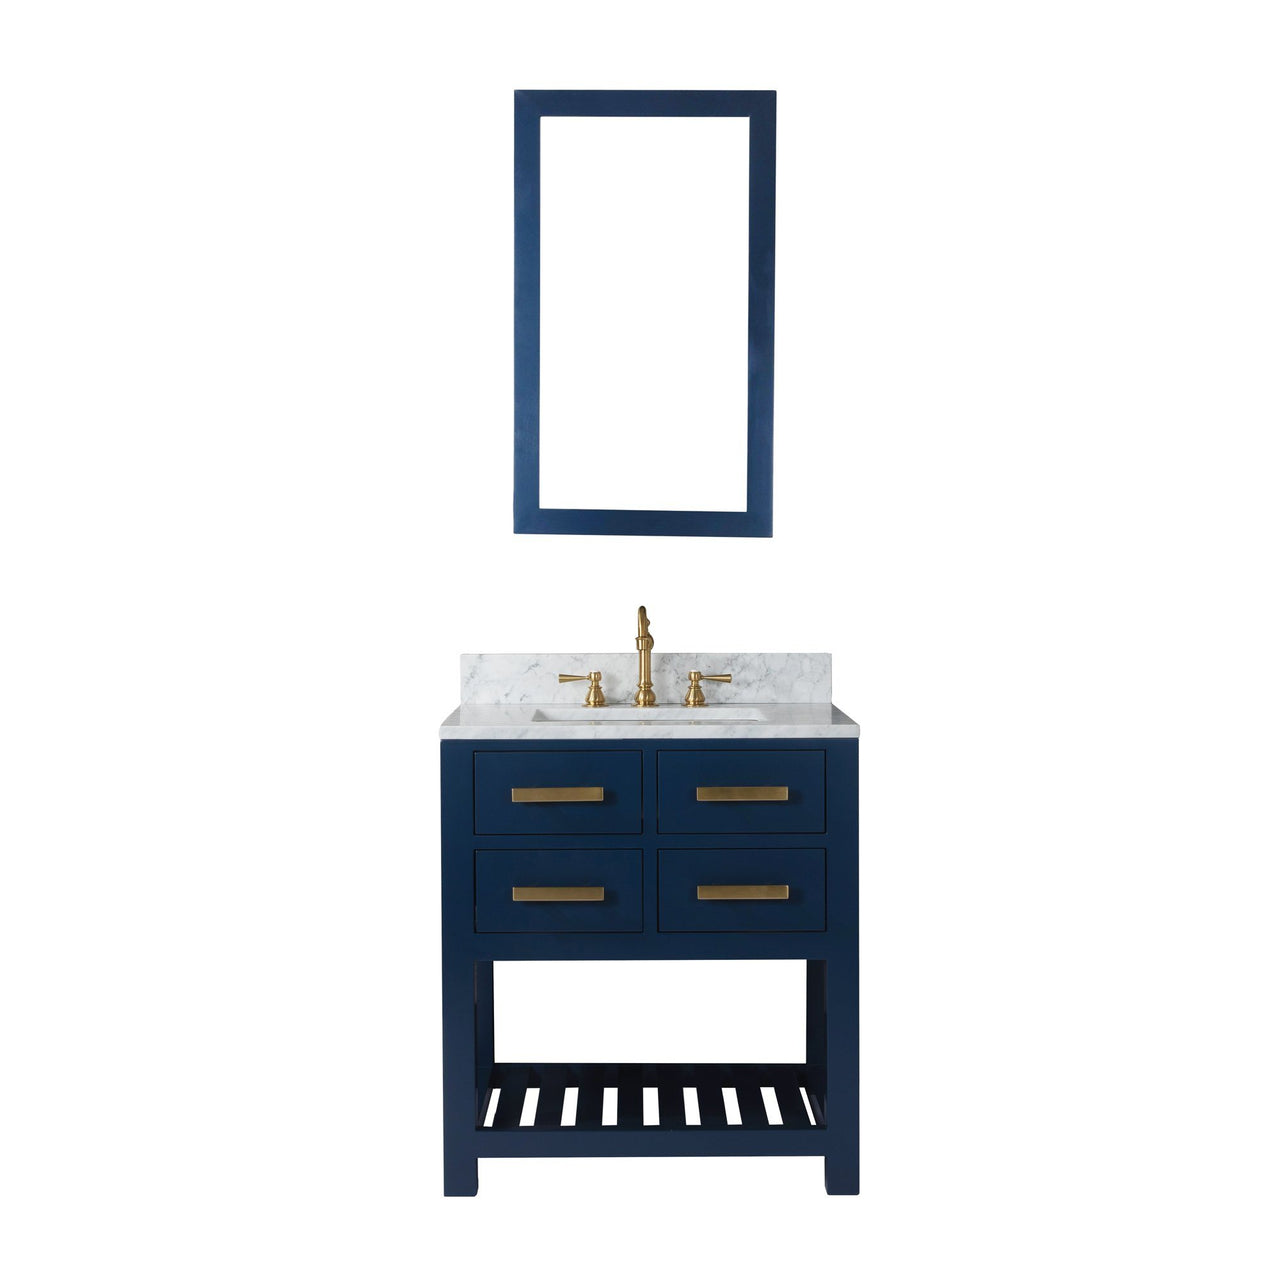 30 Inch Monarch Blue Single Sink Bathroom Vanity With F2-0012 Satin Brass Faucet And Mirror From The Madalyn Collection Vanity Water Creation 